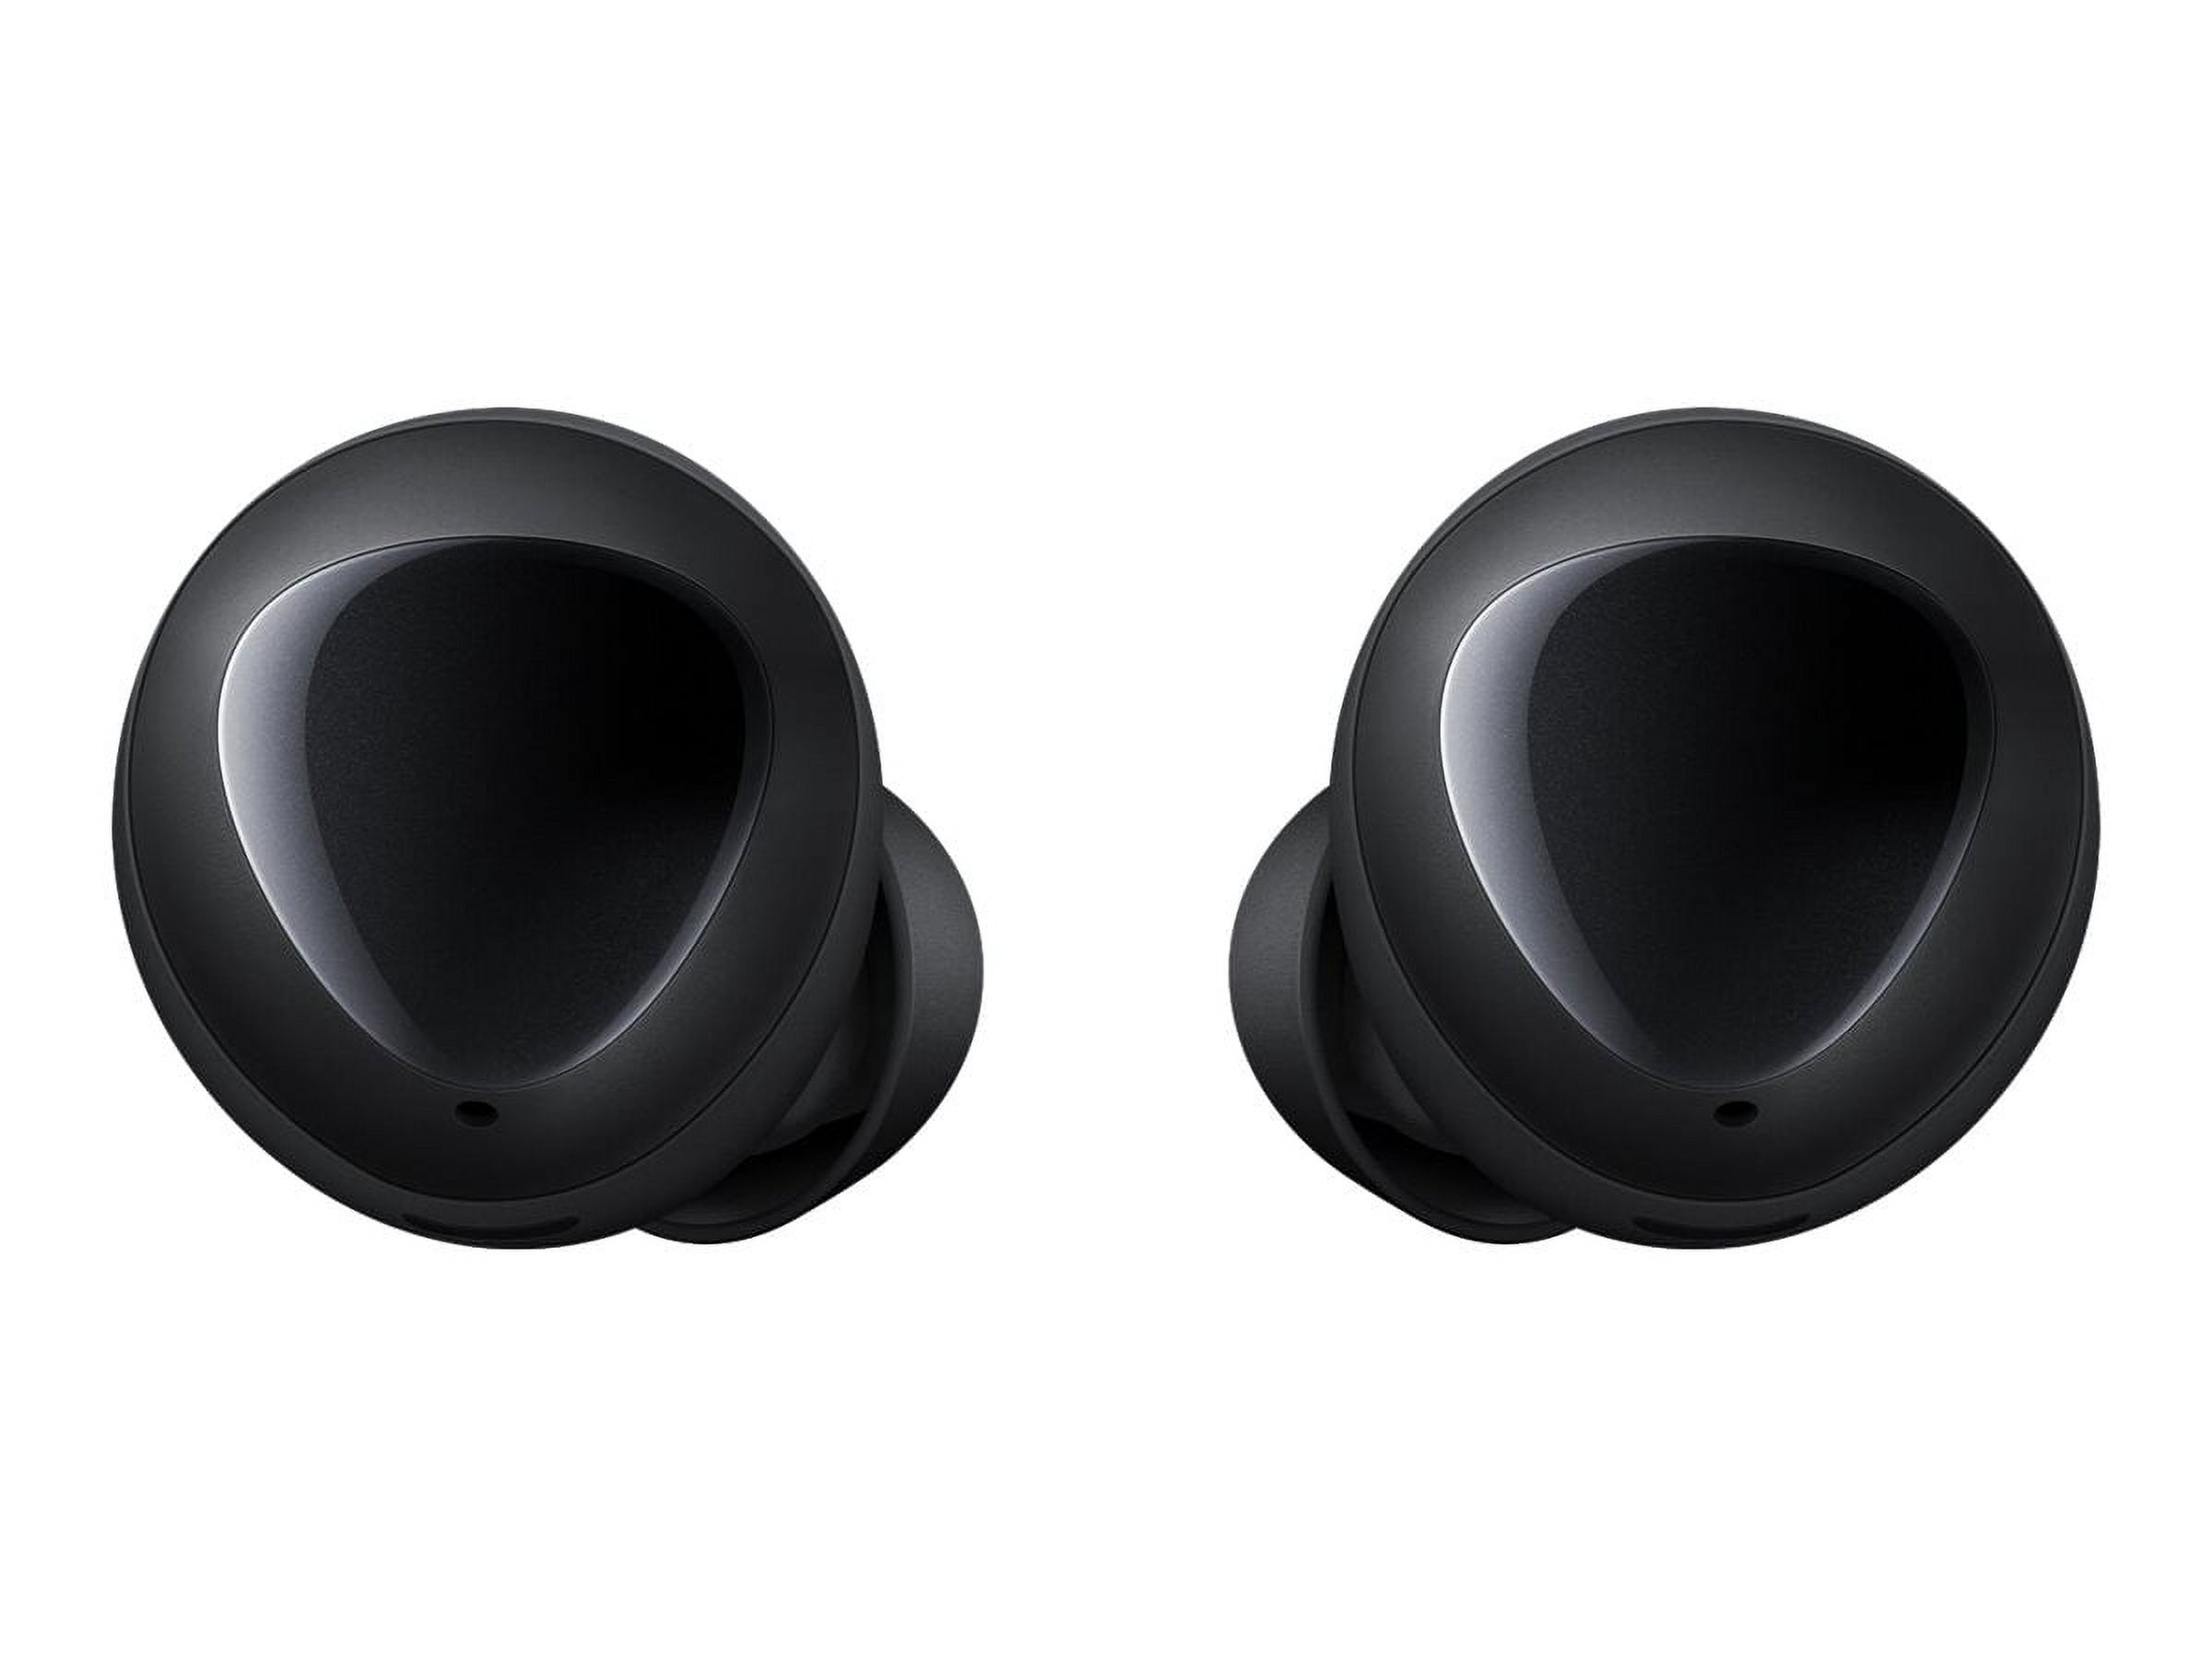 SAMSUNG Galaxy Buds, Black (Charging Case Included) - image 2 of 10